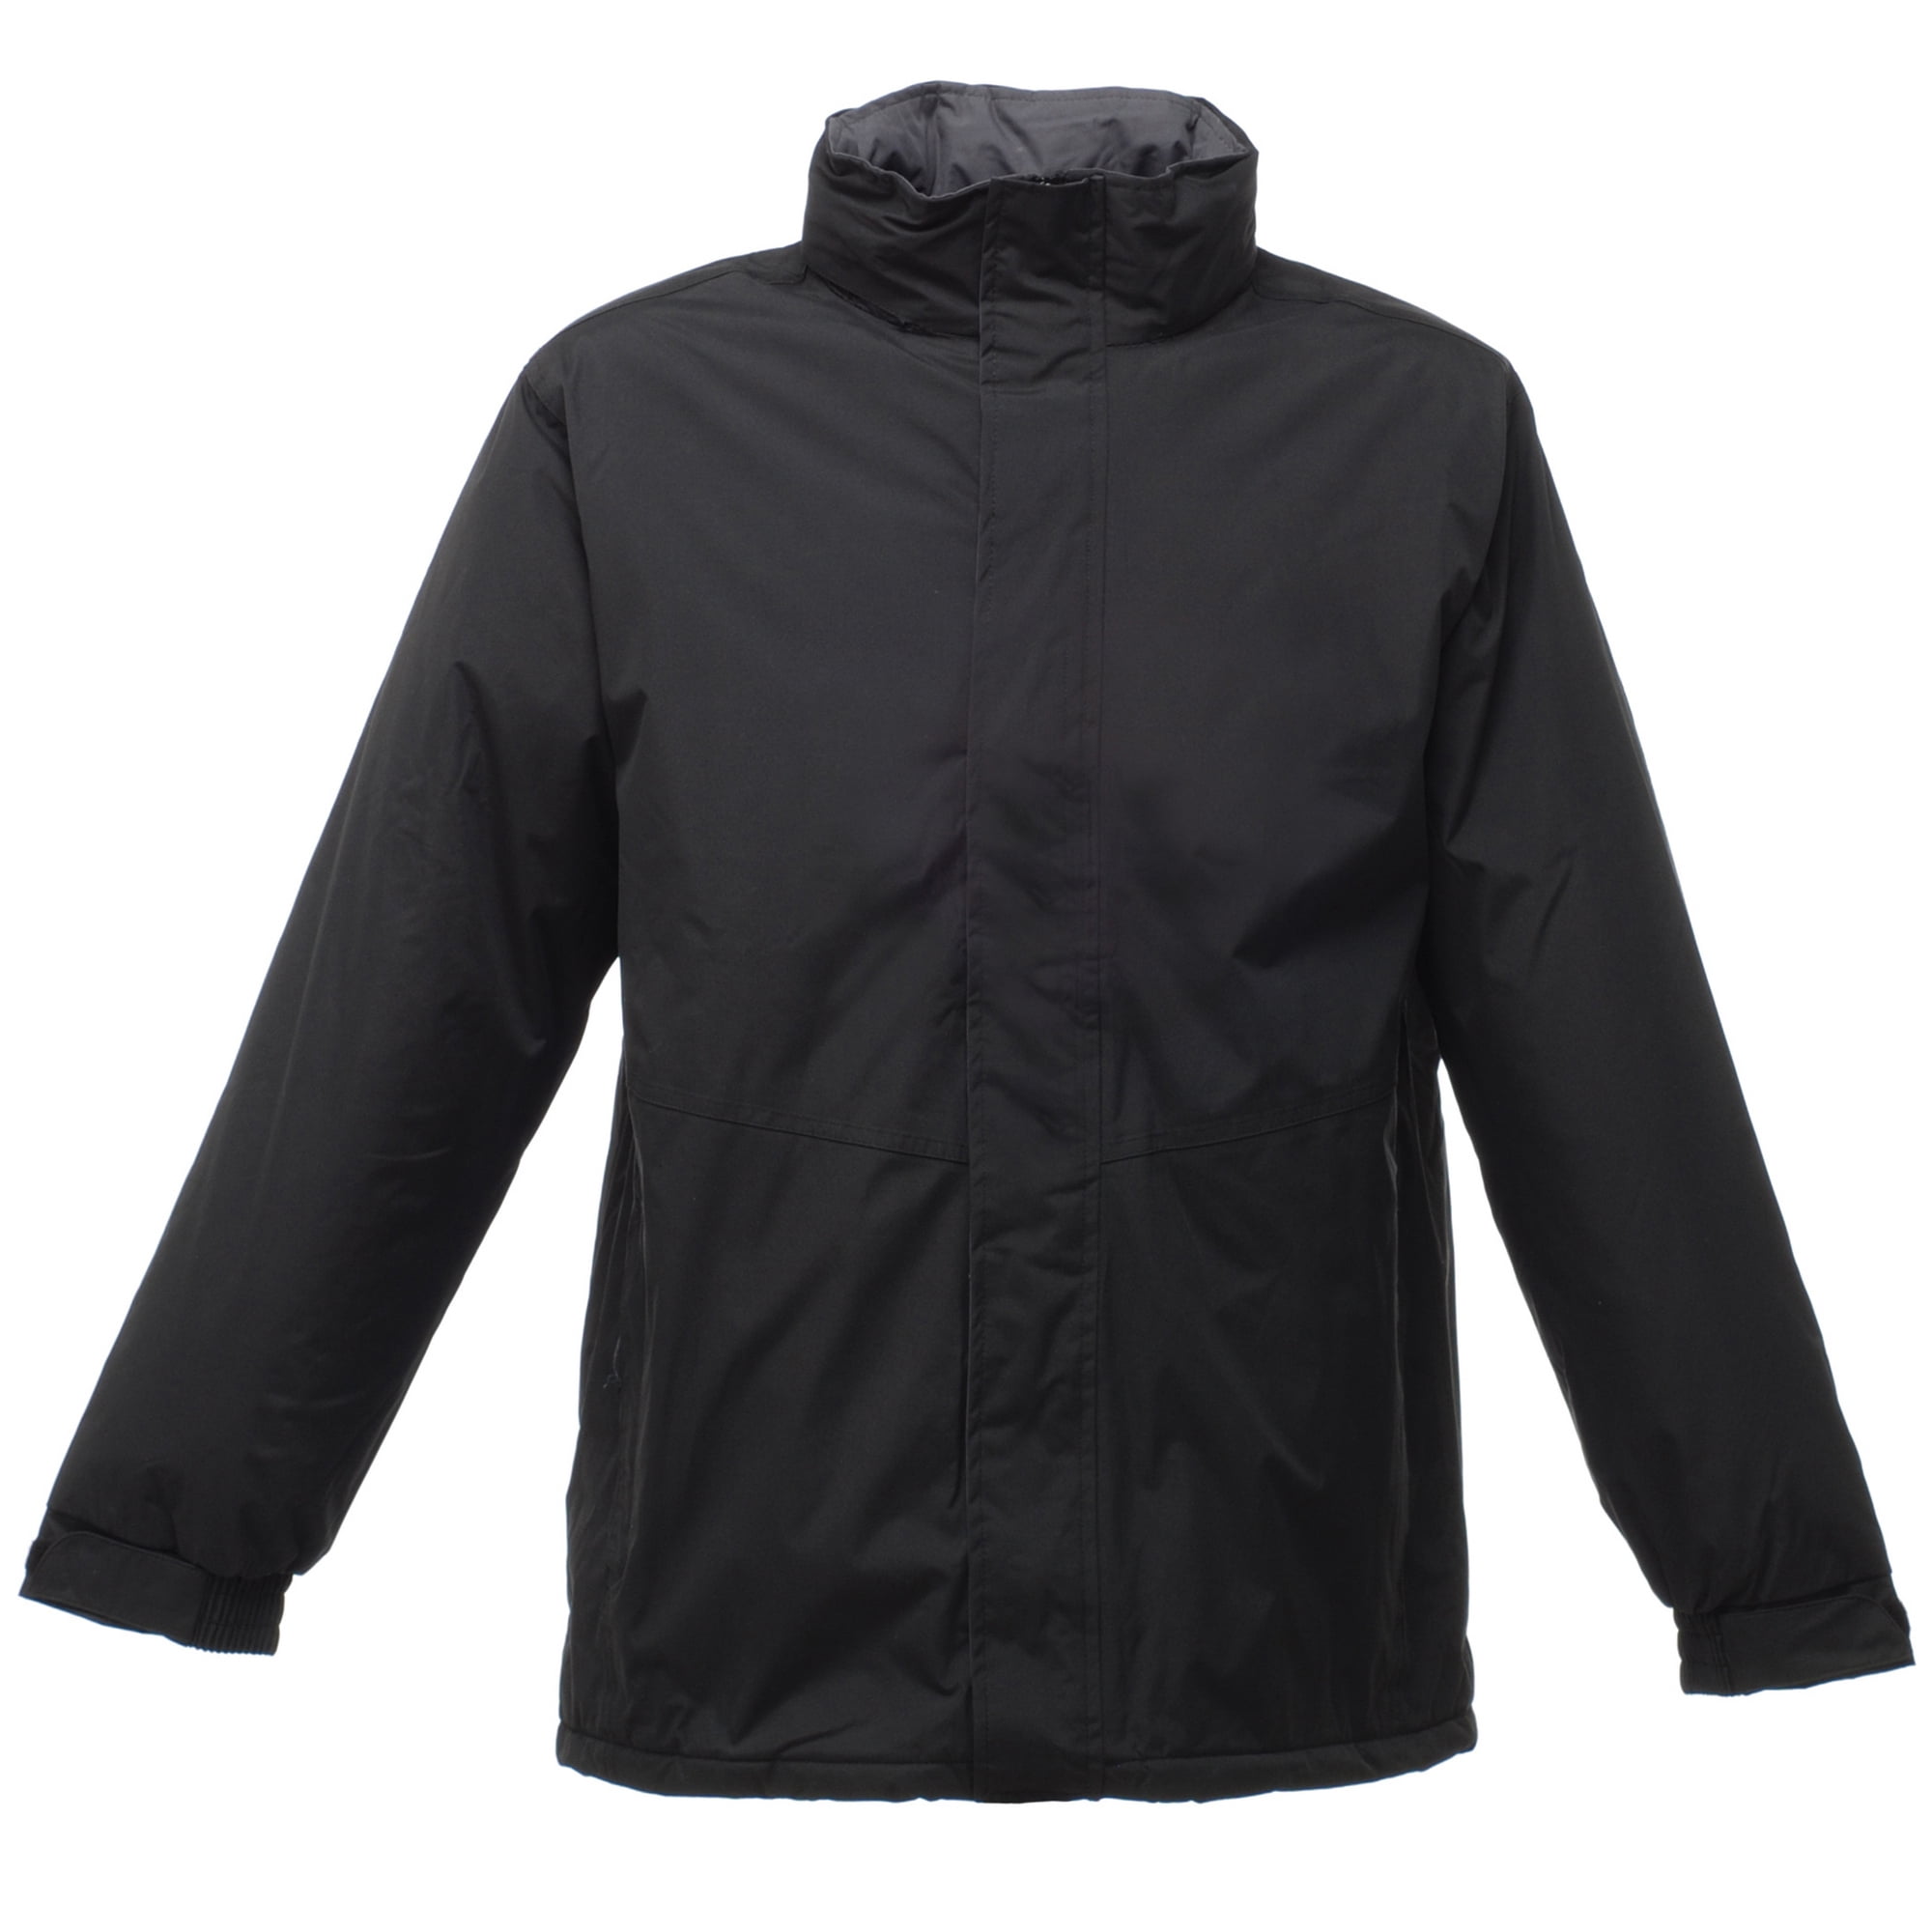 69%OFF Regatta Zyber Full Zip Insulated Water Repellent Mens Sports Jacket 